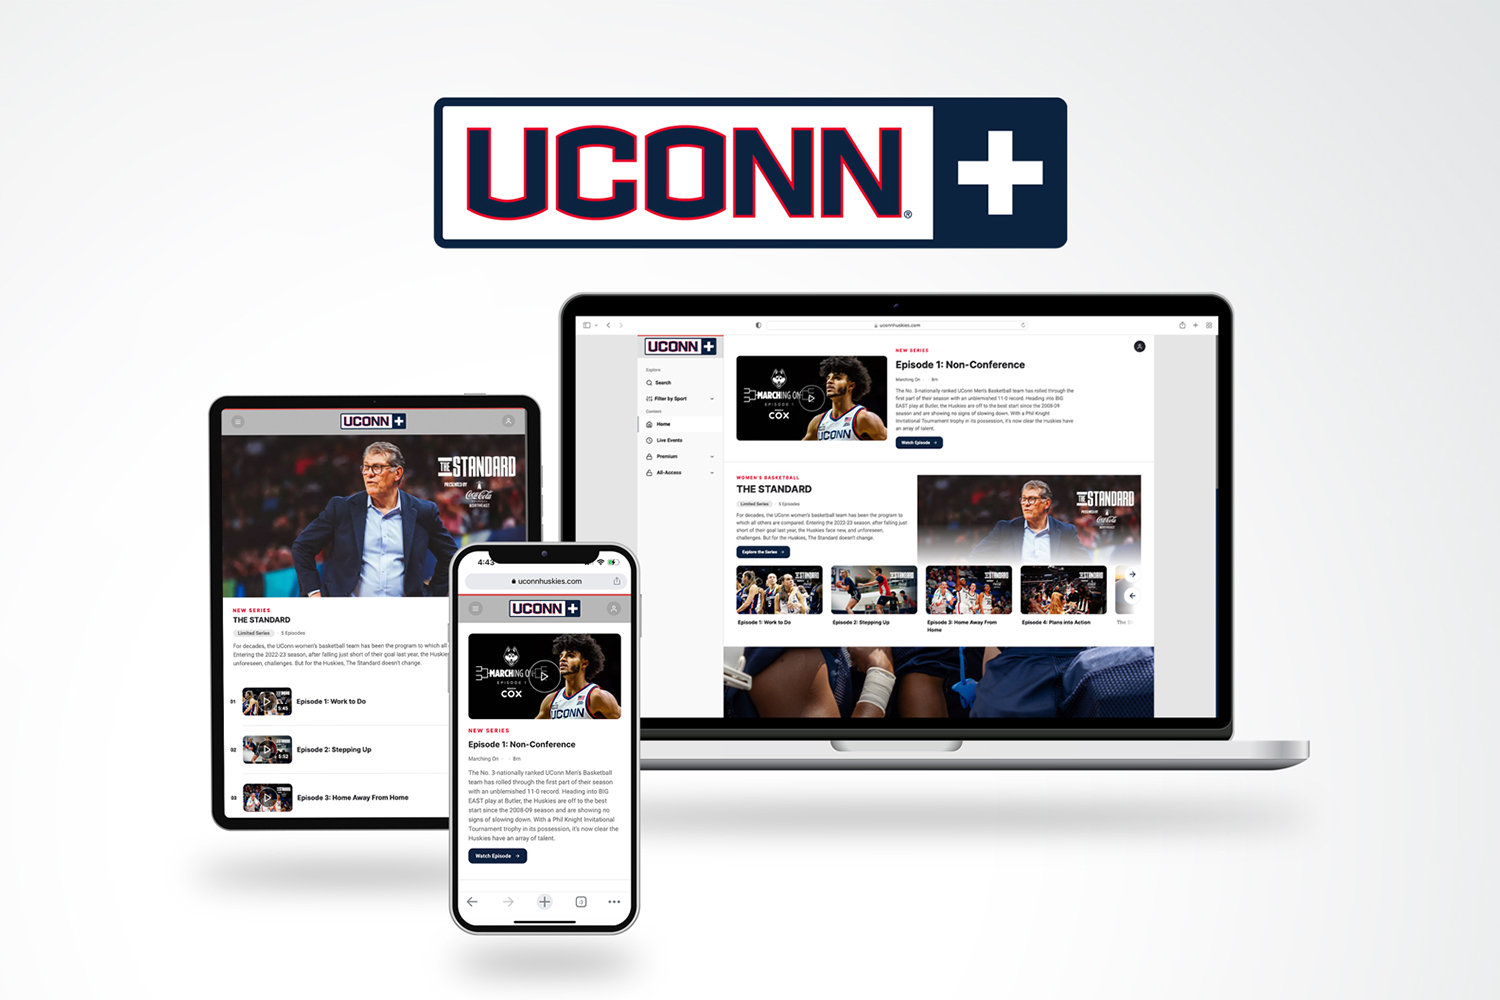 UConn+ Streaming Digital Network to Launch Jan